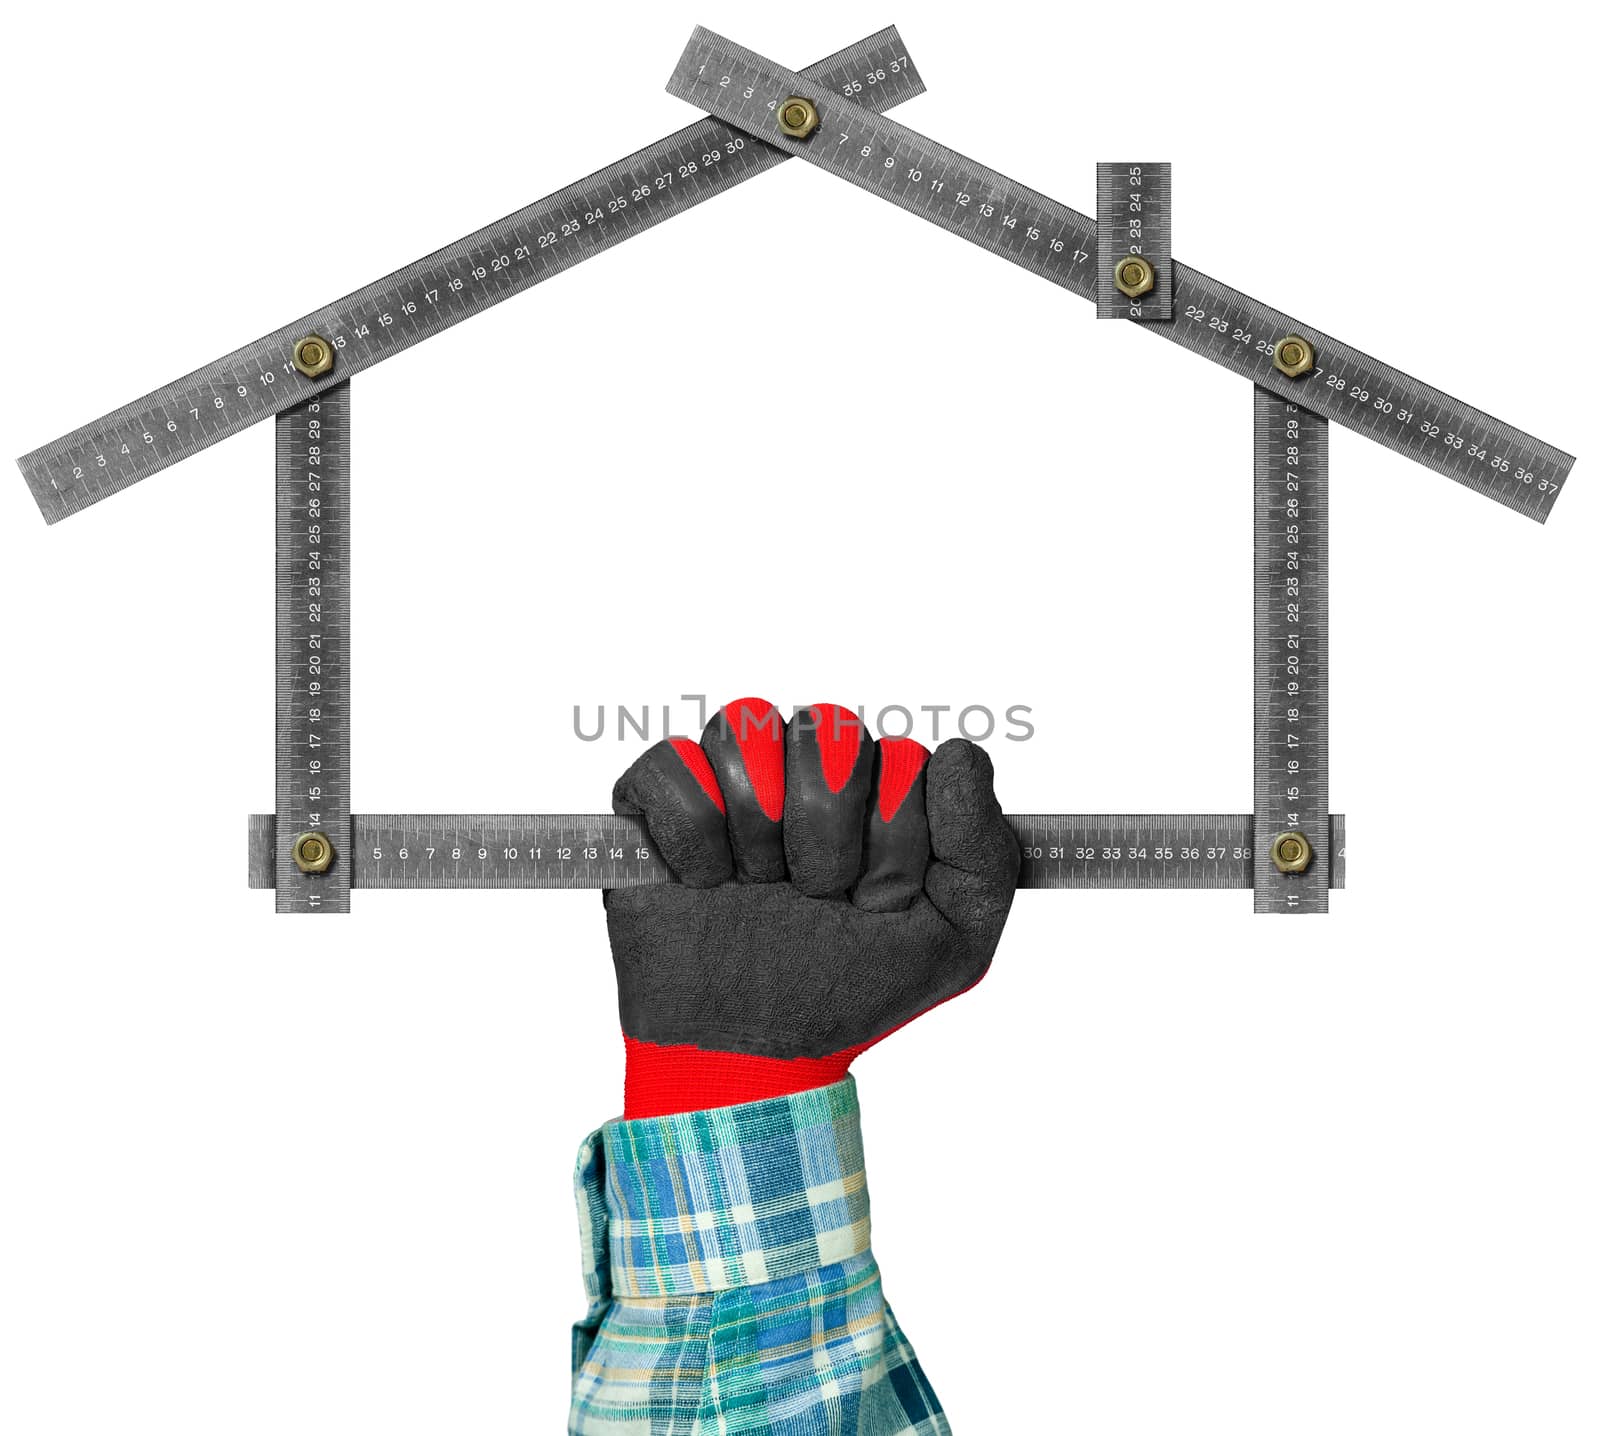 Hand with red and black work glove holding a metal meter ruler in the shape of house isolated on white background. Concept of house project 